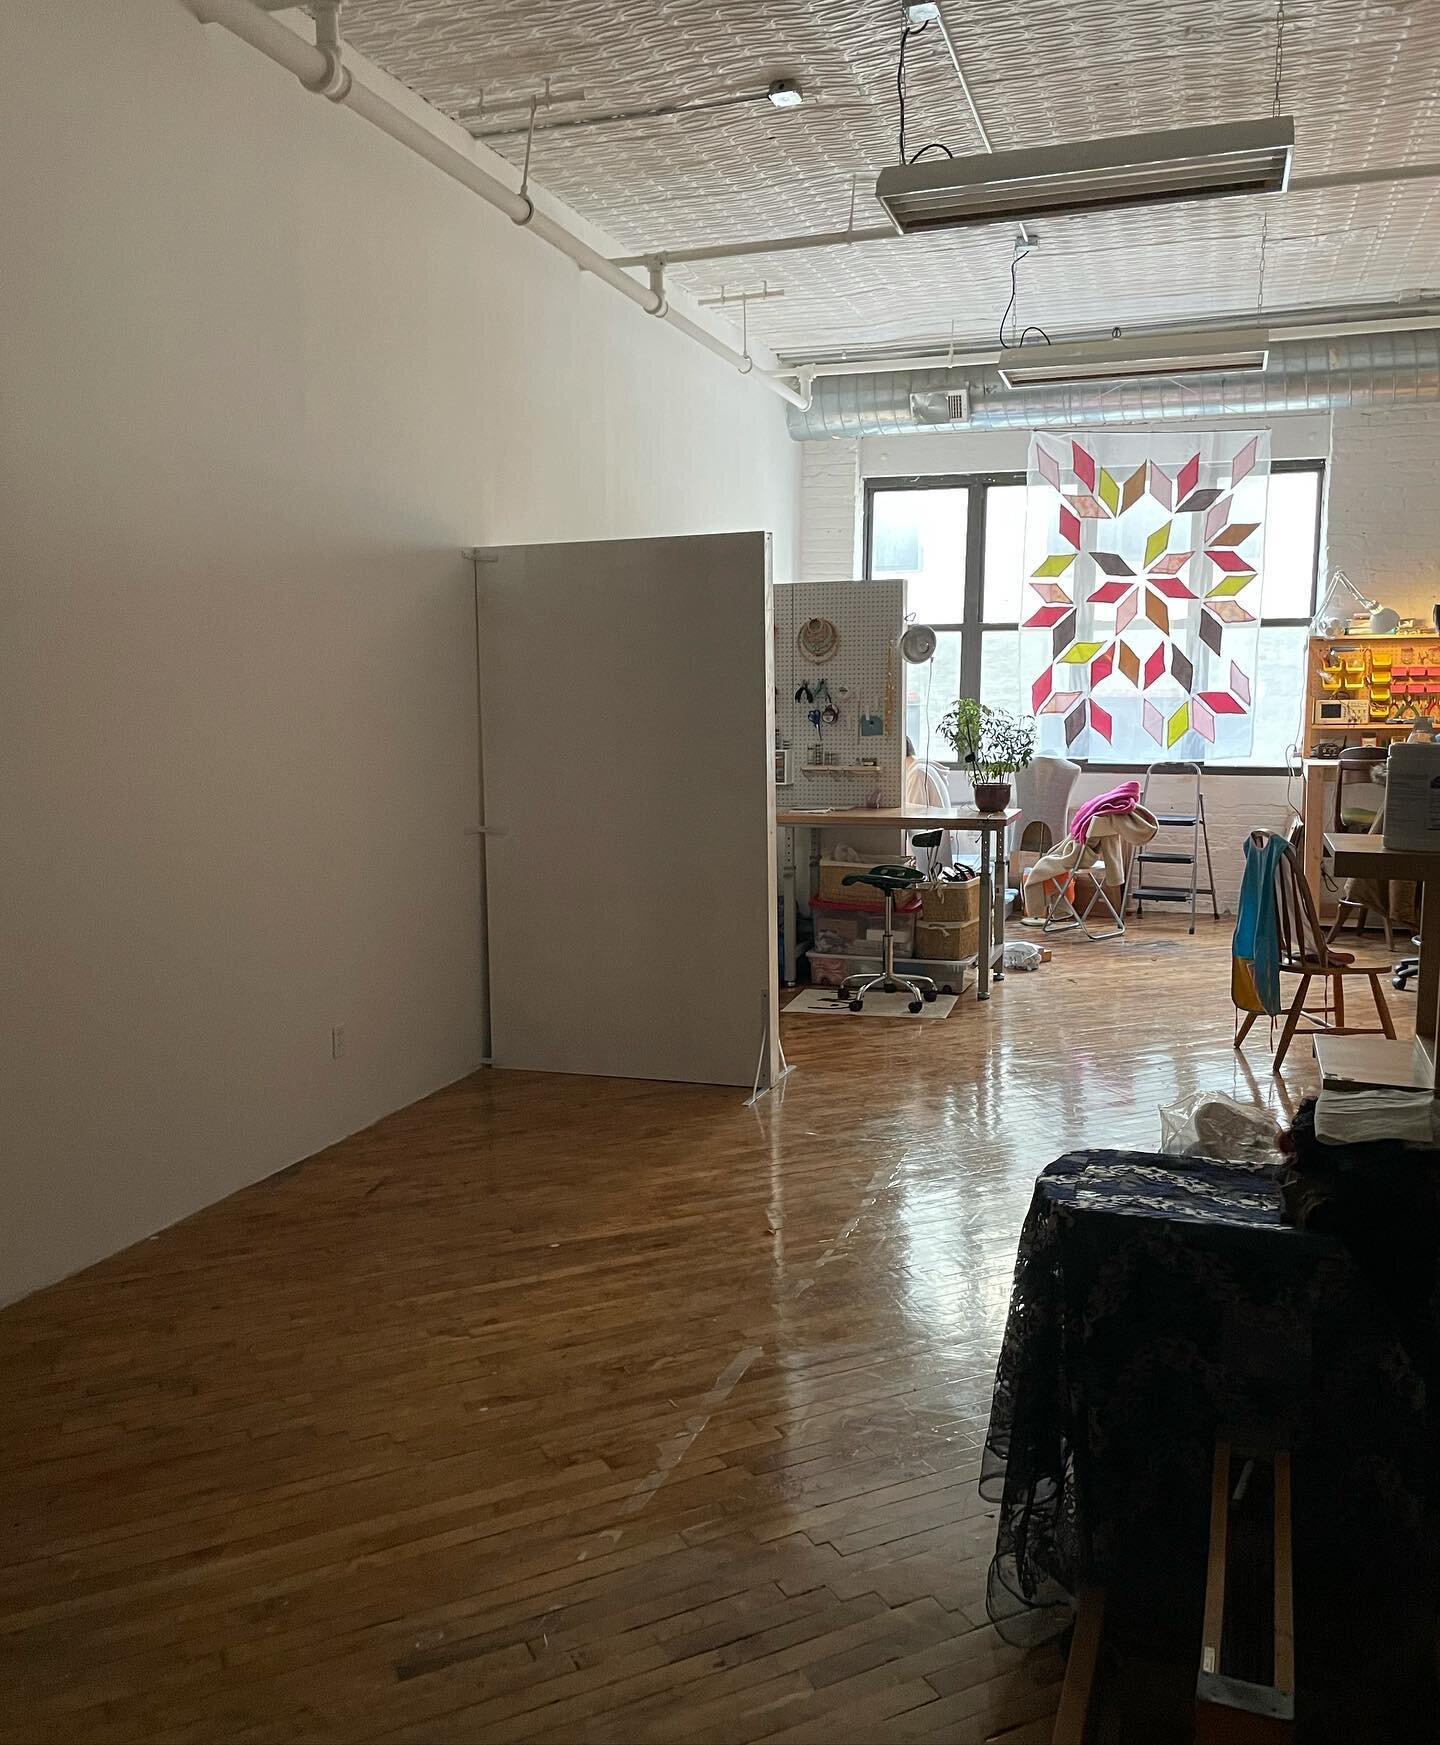 ☯︎ SPACE AVAILABLE AT NOLO STUDIOS! ☯︎

We have one opening in our gorgeous, sunny shared studio!

This is a big, clean, beautiful space shared with very chill, respectful creatives. We're looking for the right new member to join our little community